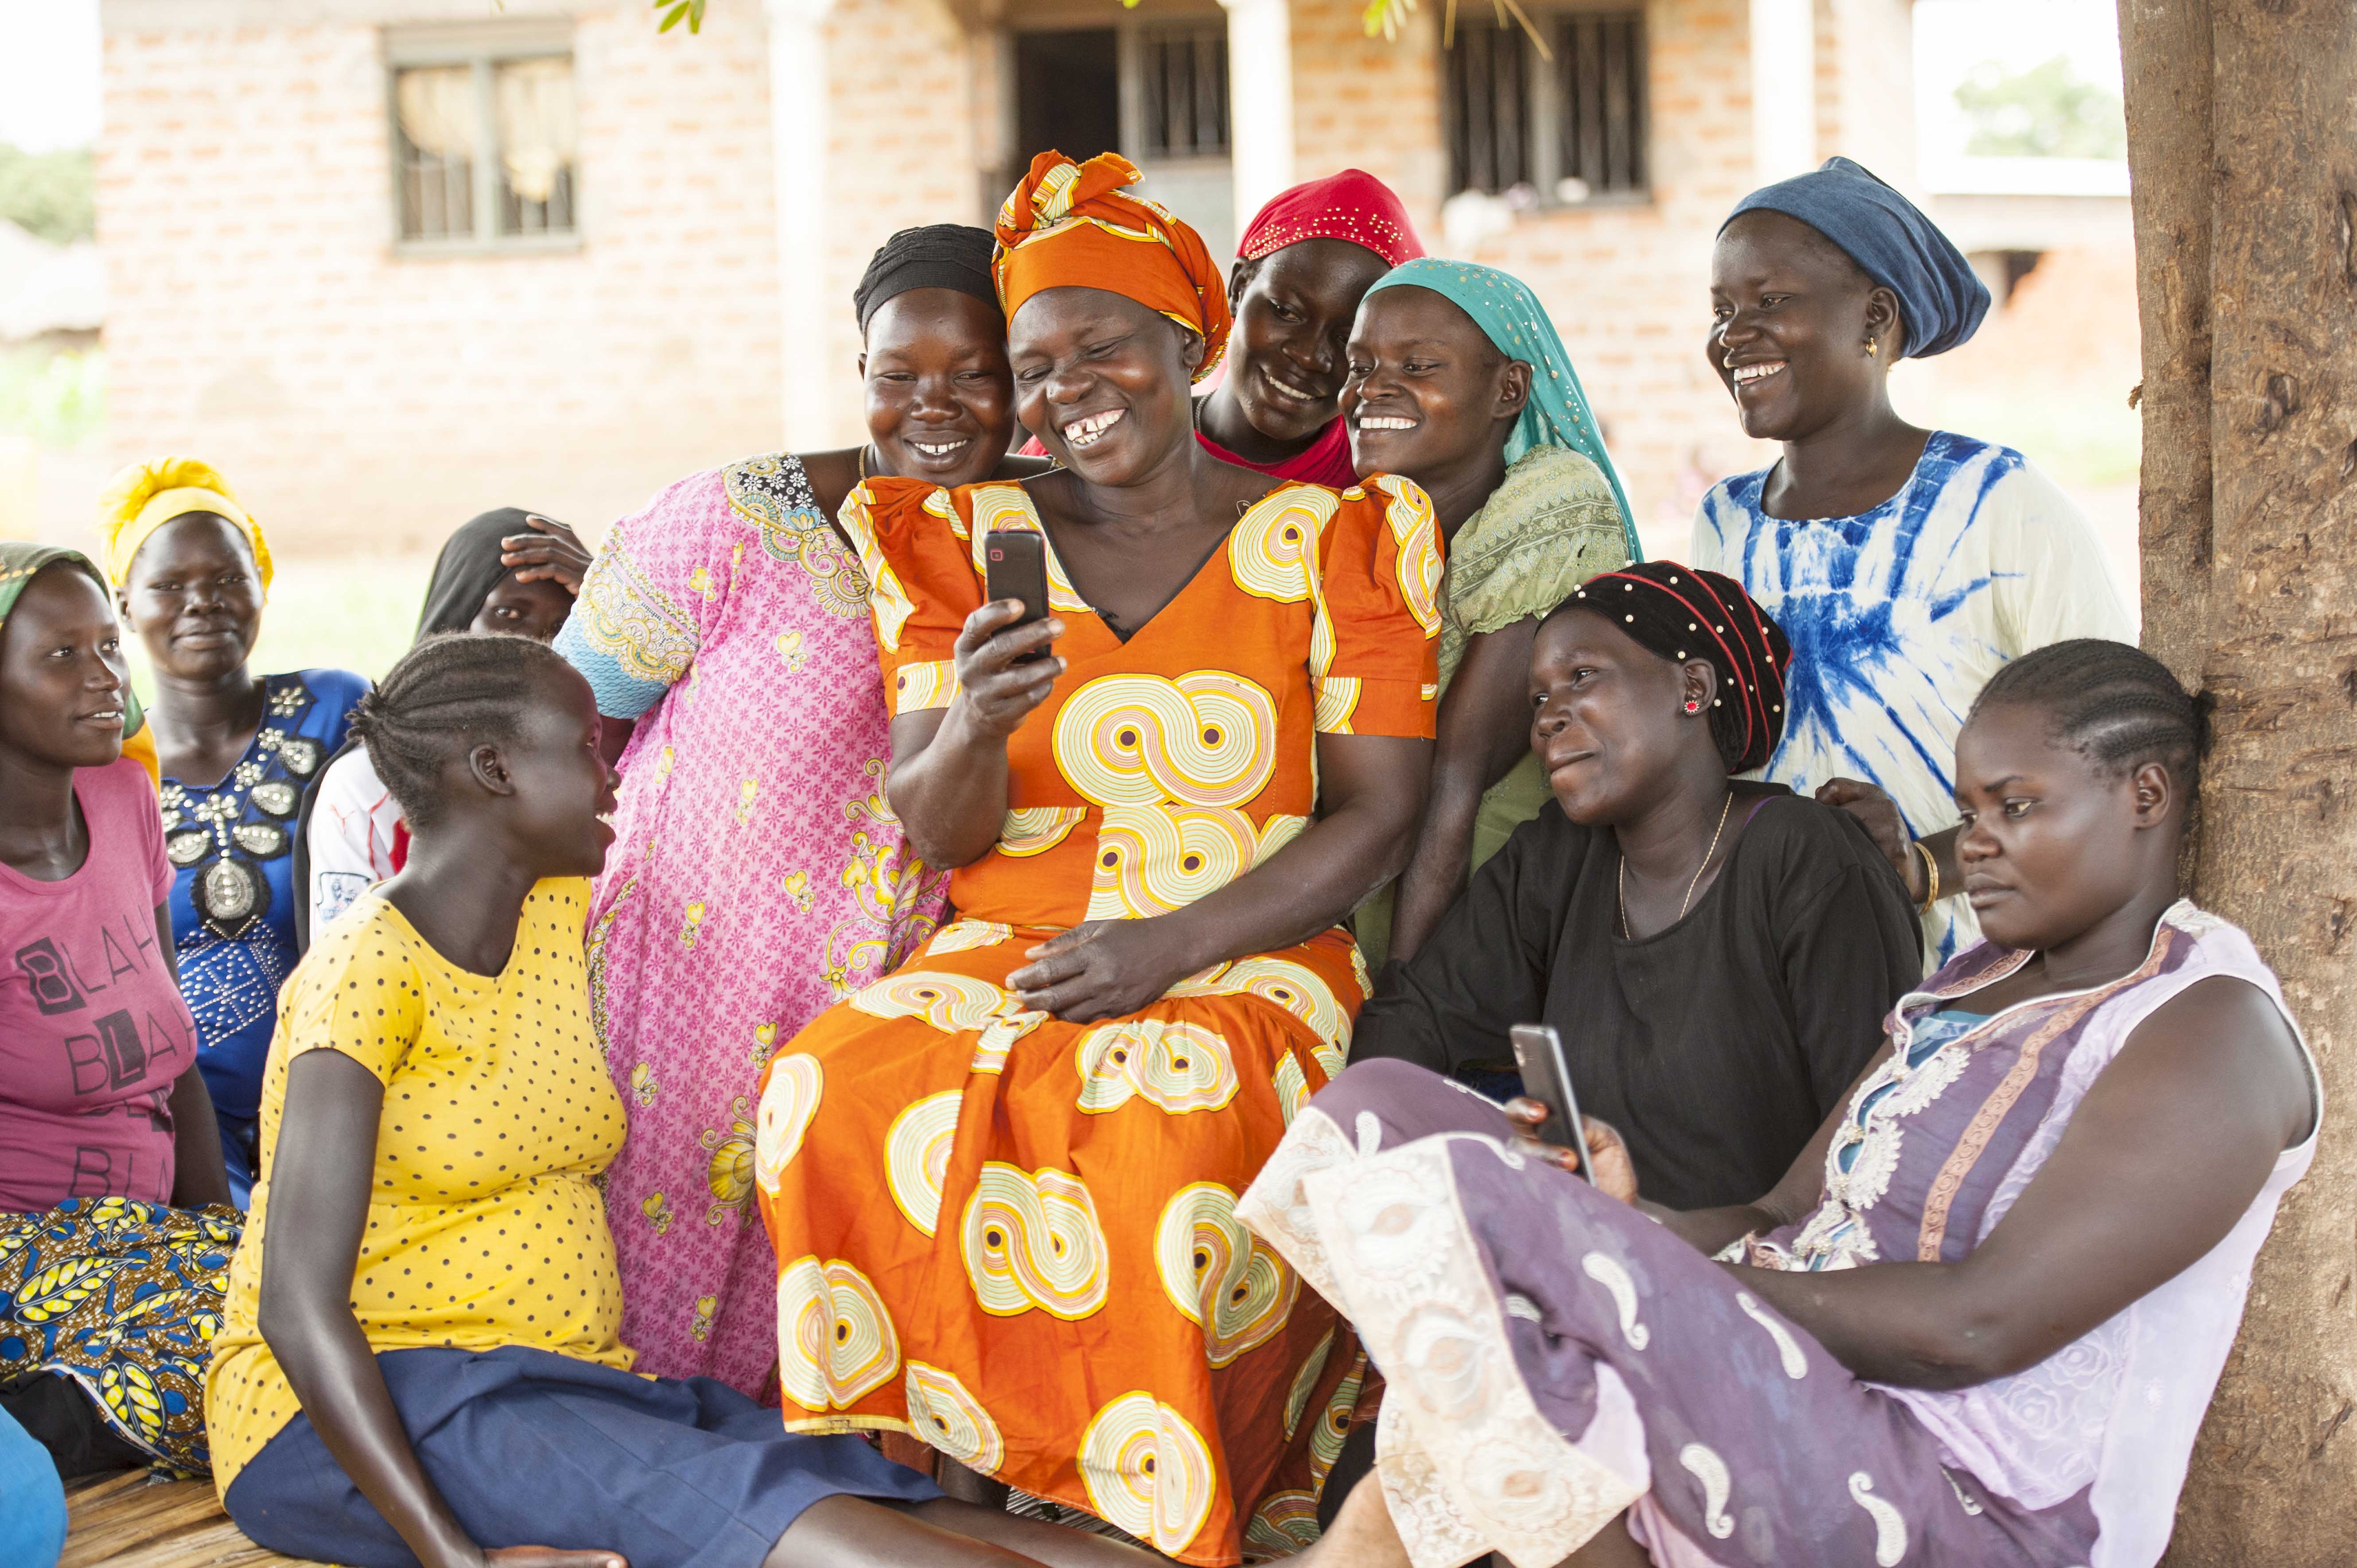 Women of Manduru village, Yumbe District, Uganda, discuss text messages received on a phone from UNICEF innovation program FamilyConnect, which connects women and children to healthcare services. ©UNICEF/UNI232737/Kabuye